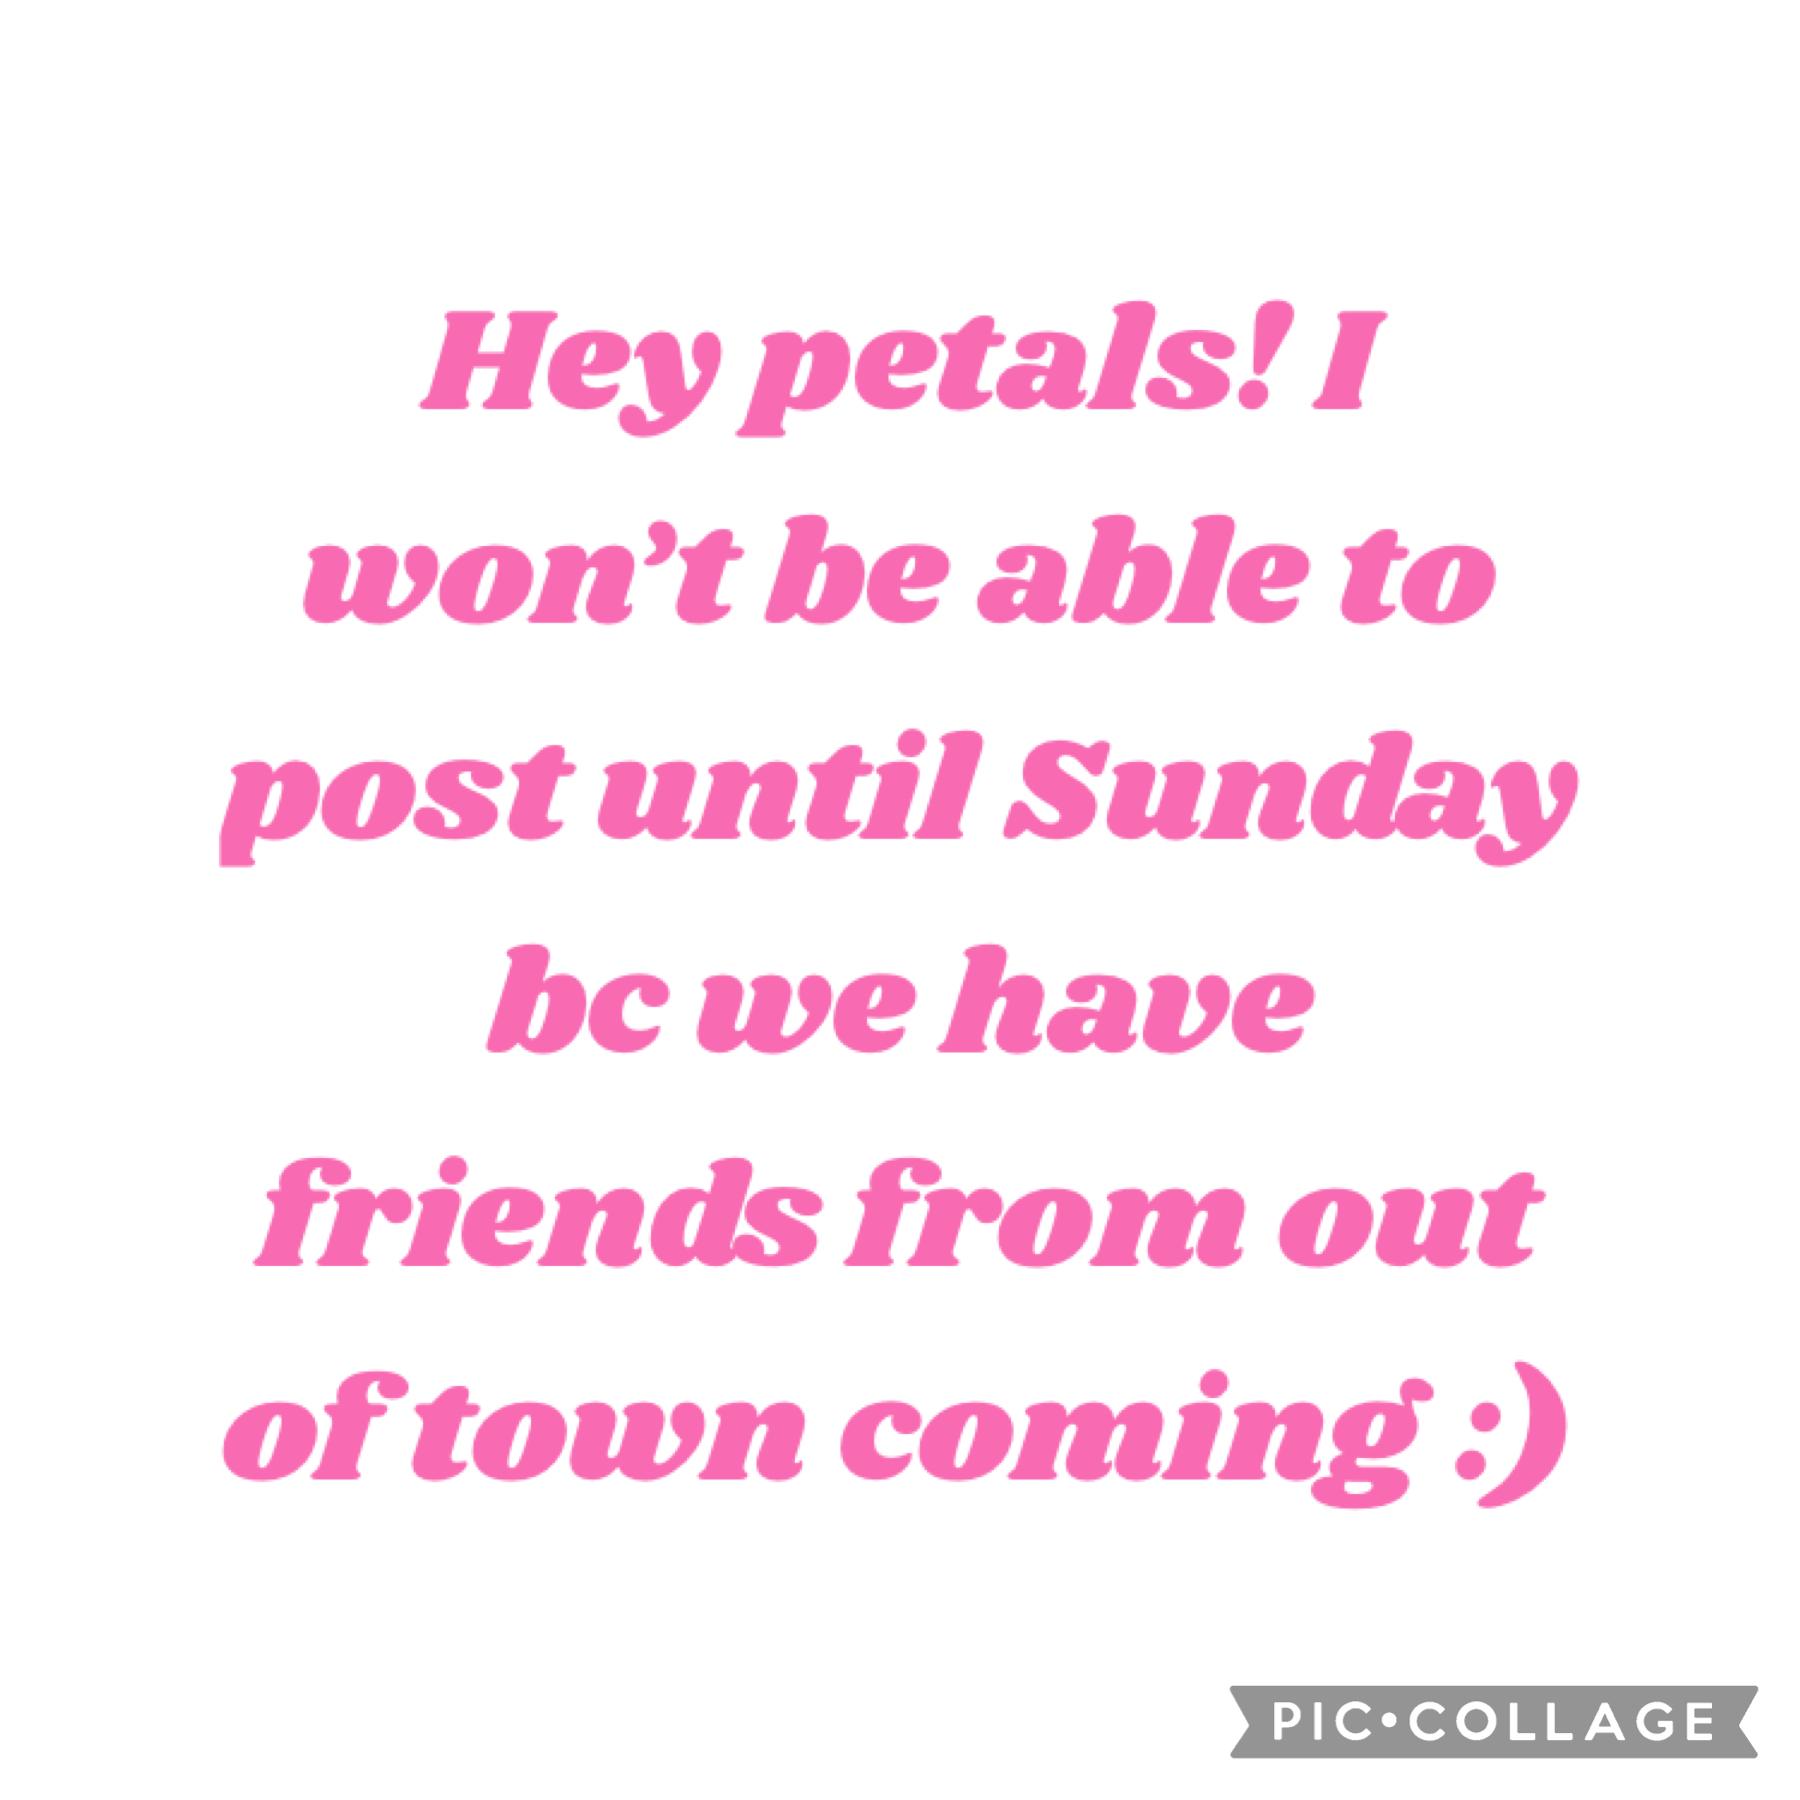 ❤️Tap❤️
Won’t be posting until Sunday! 
Stay positive xoxo,
Pink-Petals 